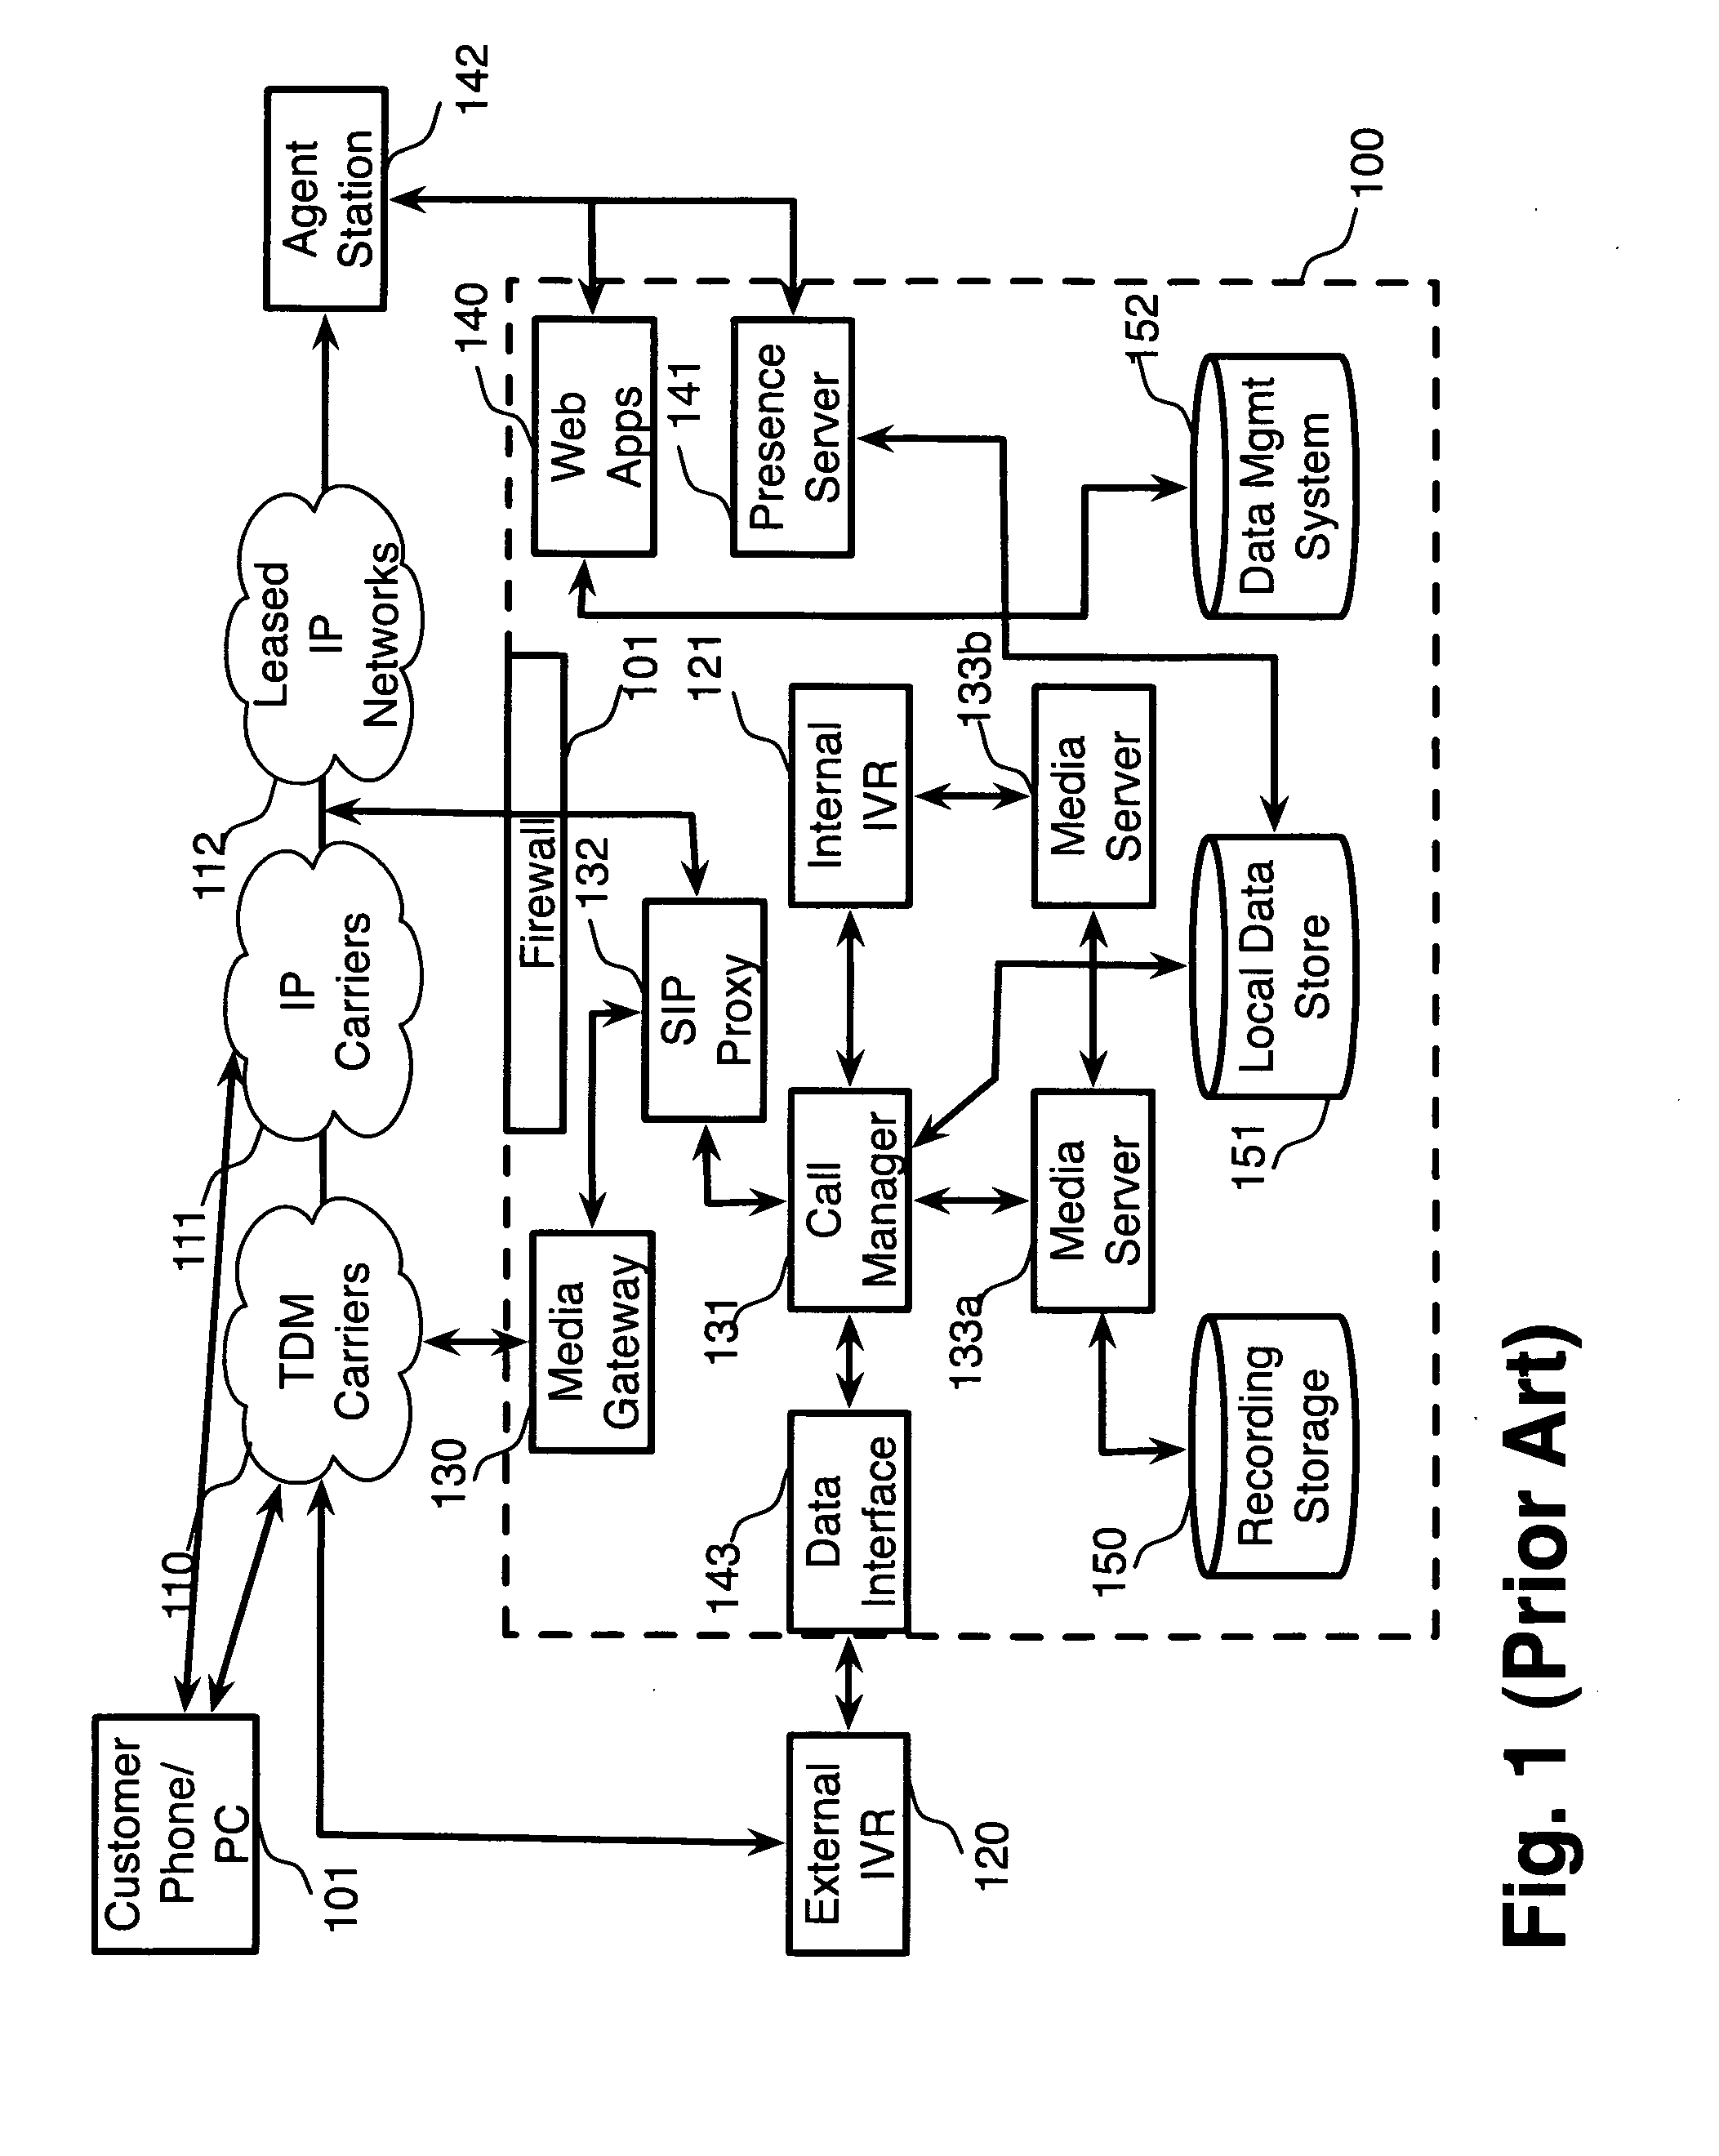 System and method for implementing adaptive security zones